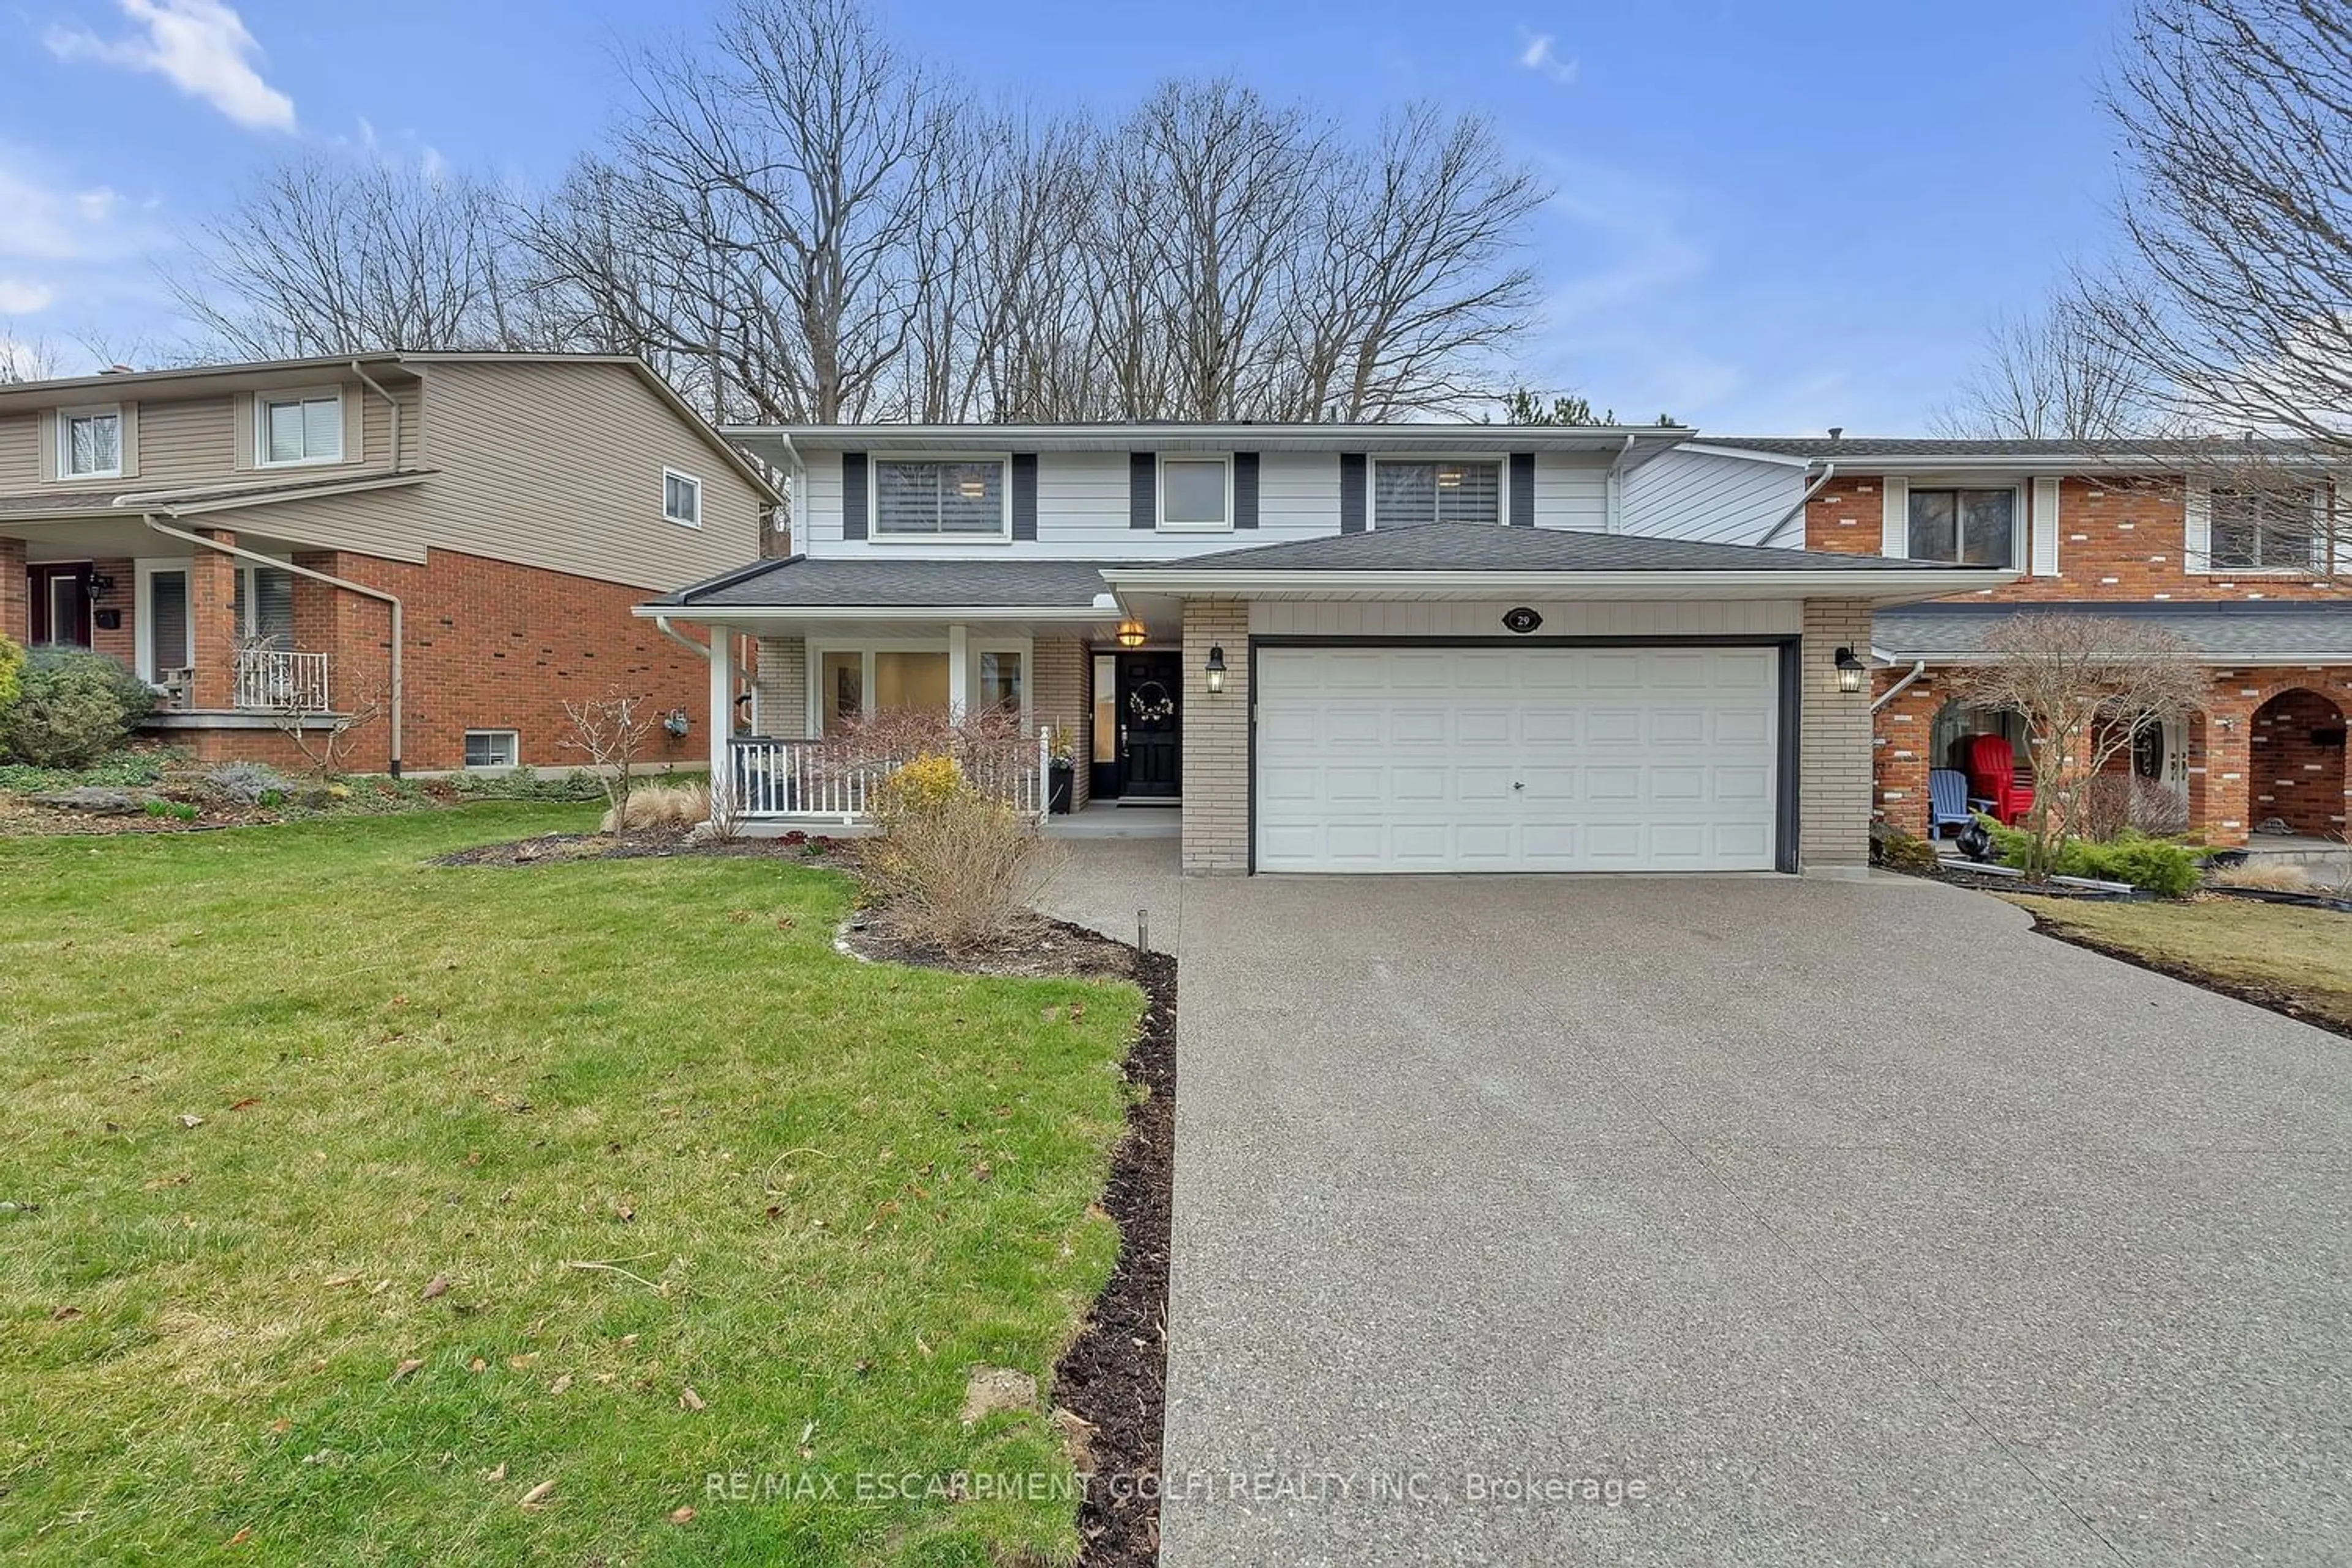 Home with brick exterior material for 29 Jerome Park Dr, Hamilton Ontario L9H 6G9